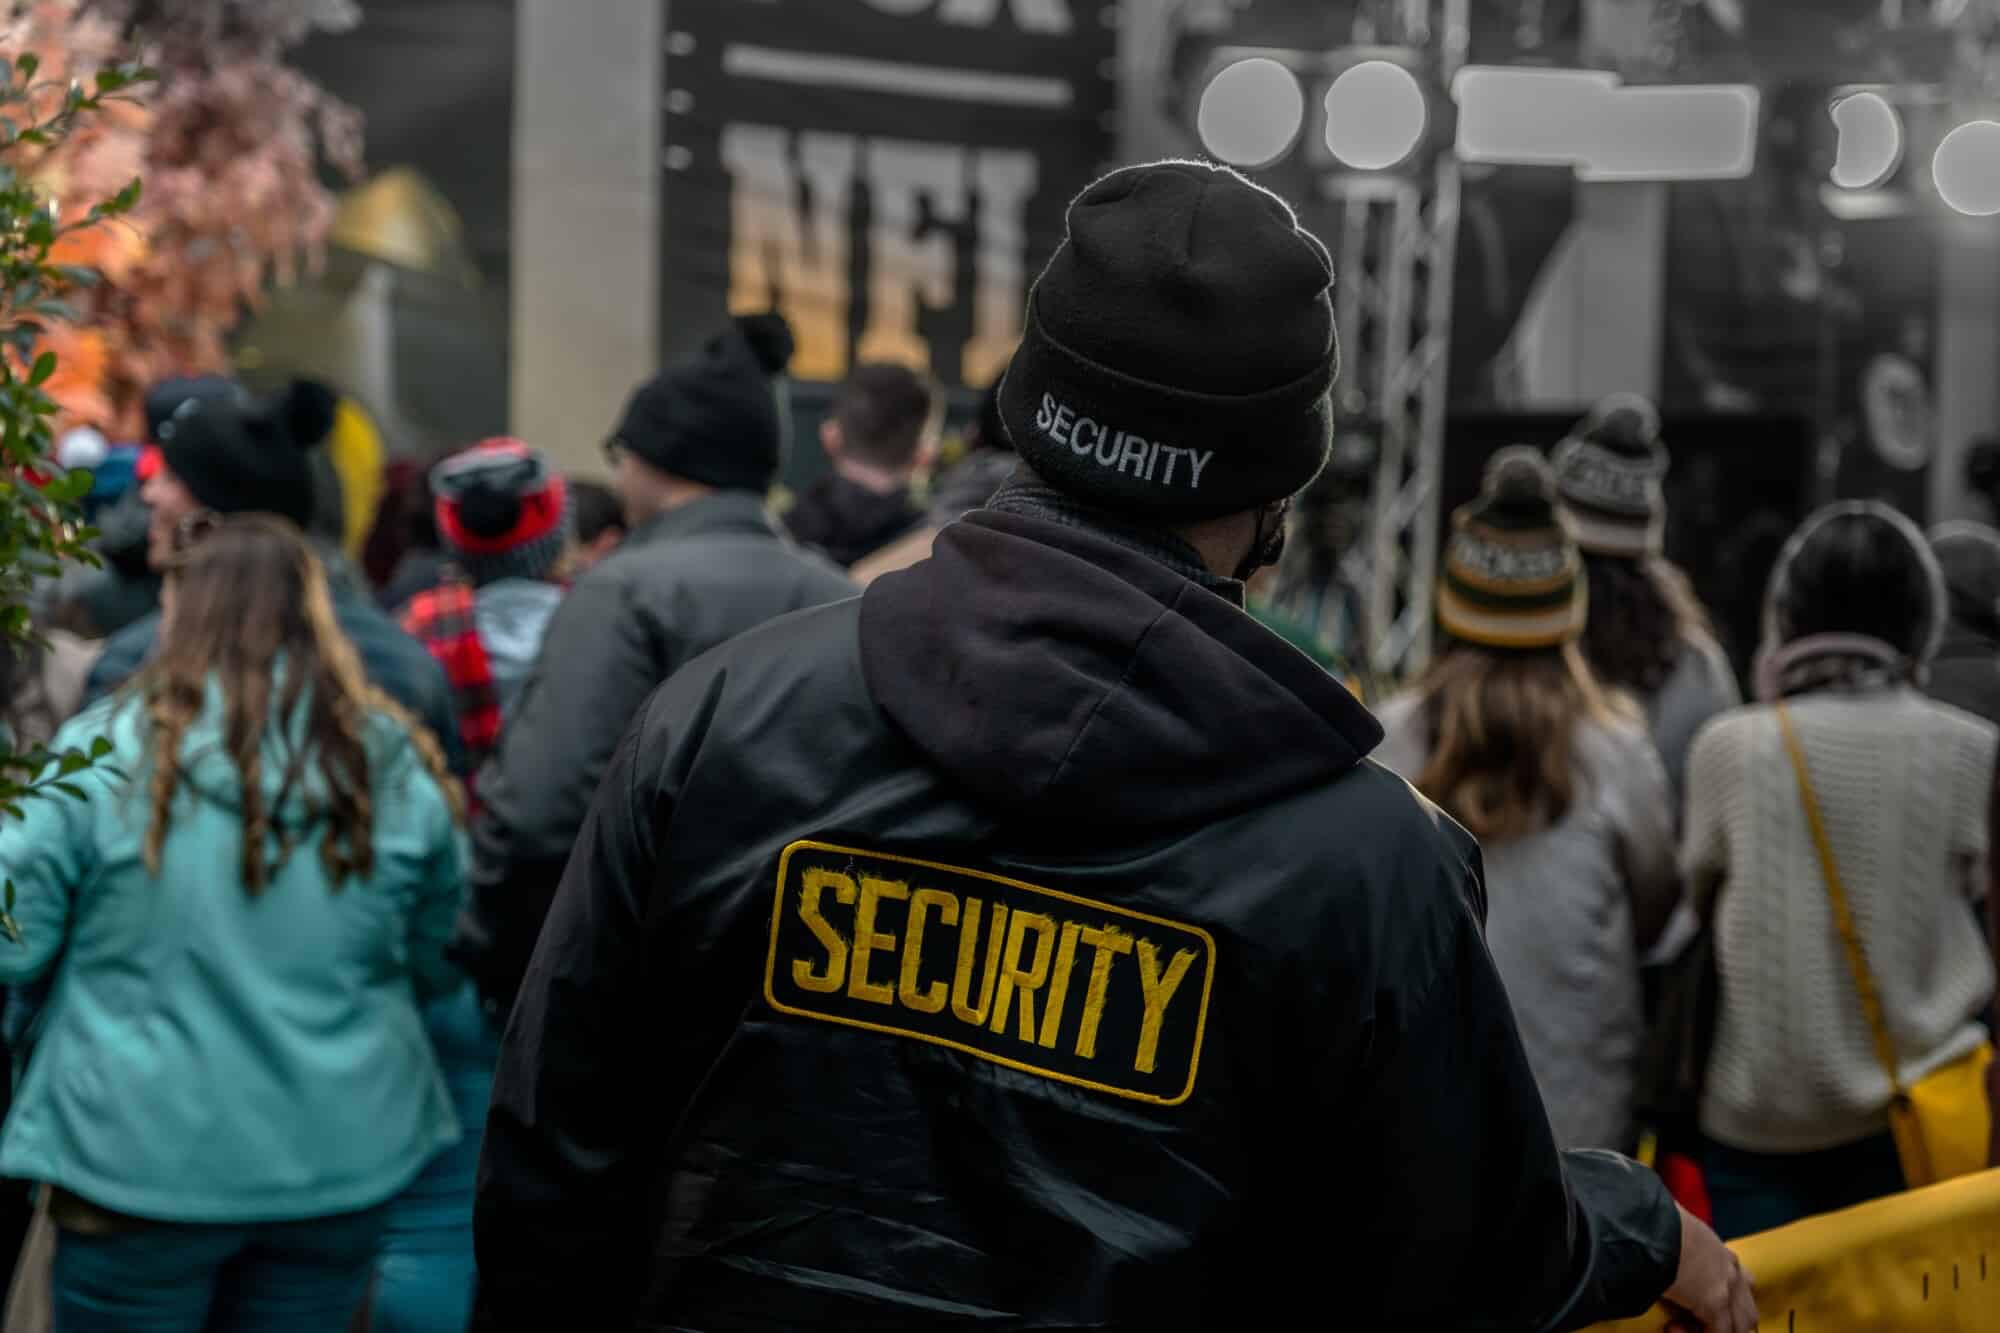 What Is the Point of an Unarmed Security Guard?